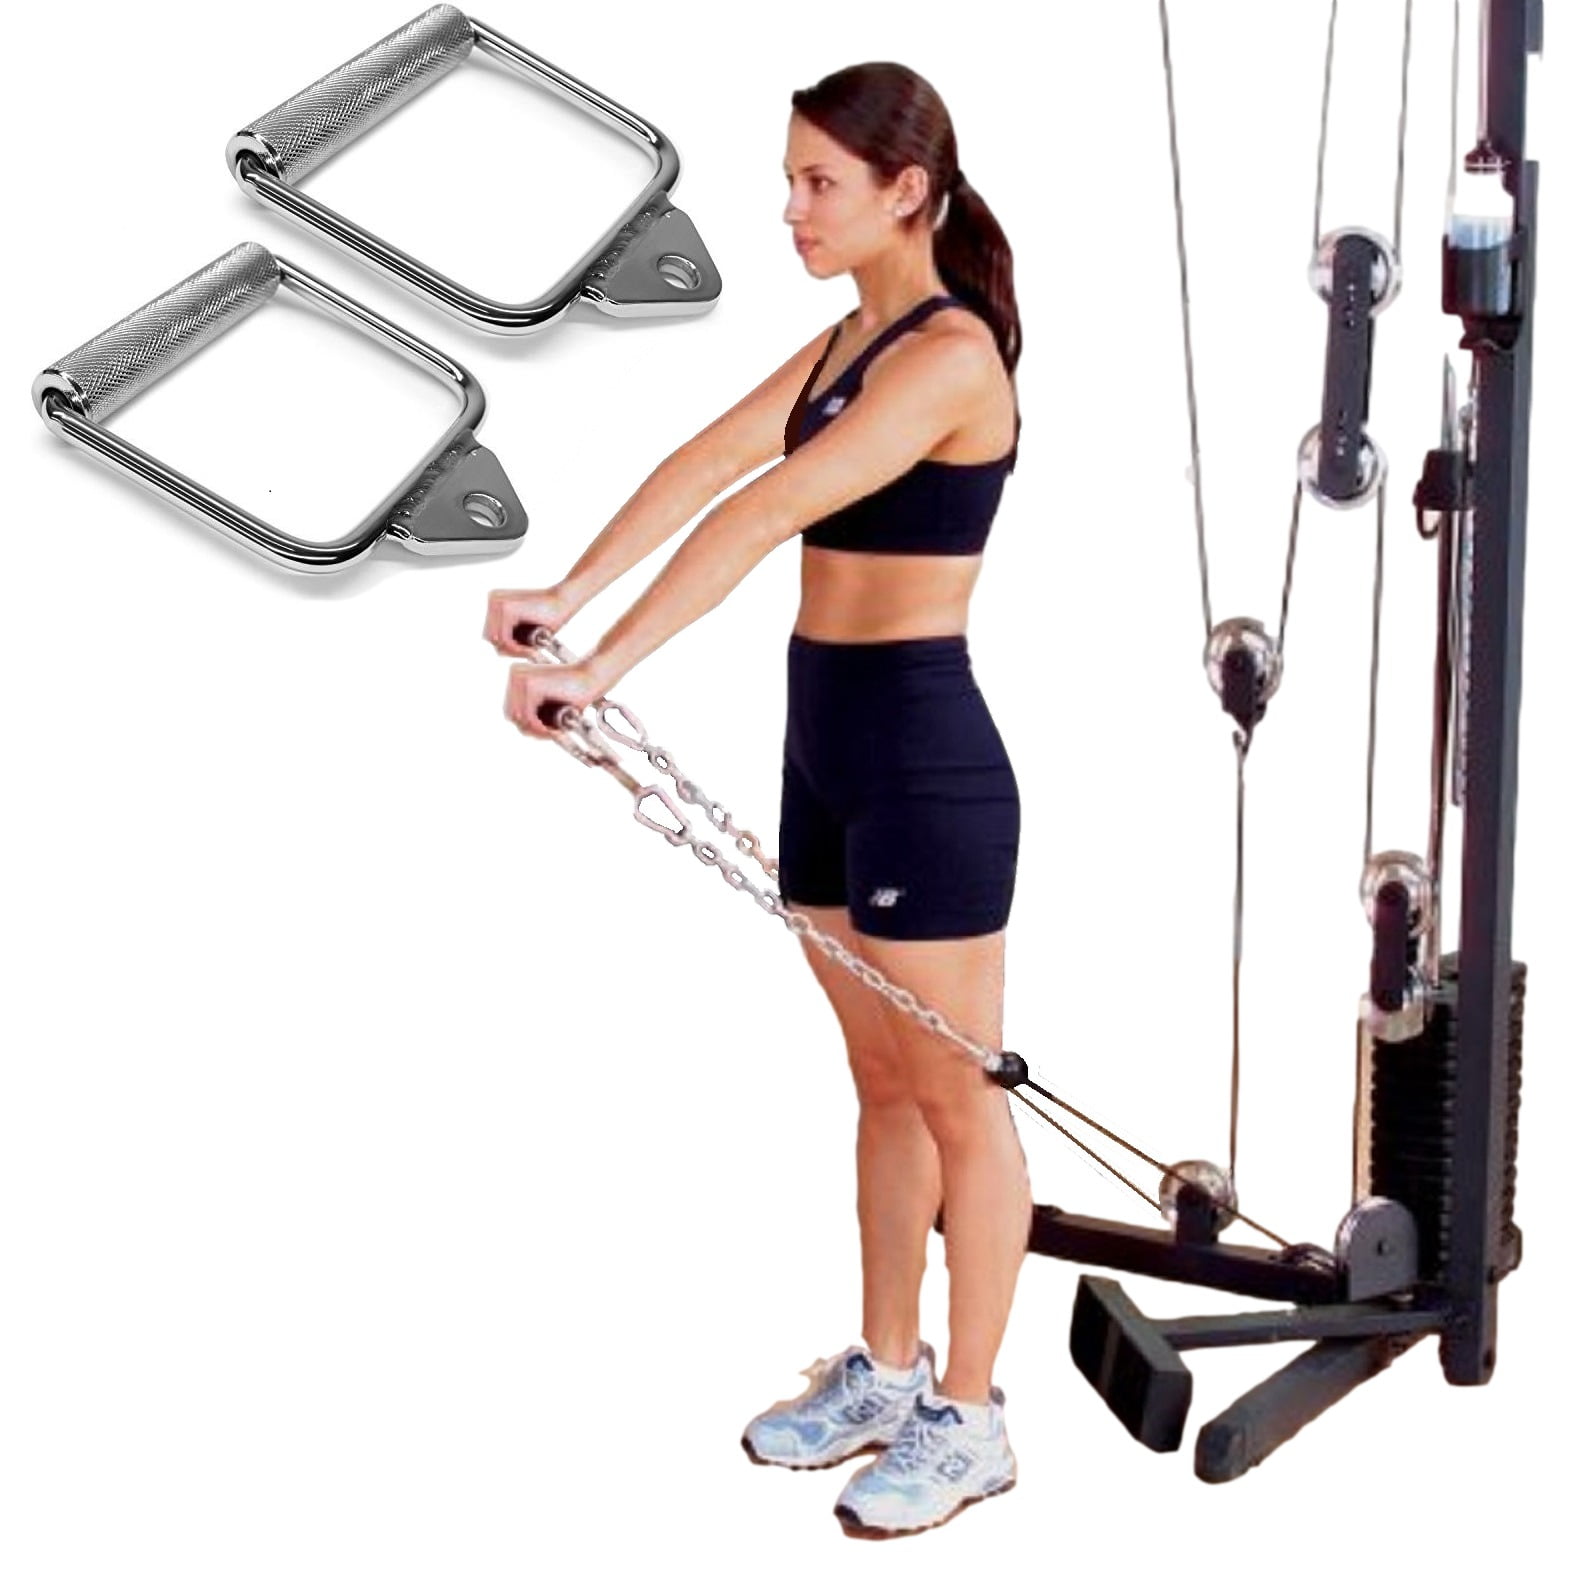 Fitness Gym Home Trainer Lat Bicep Tricep Pulling Bar Pull Down Cable Attachment 